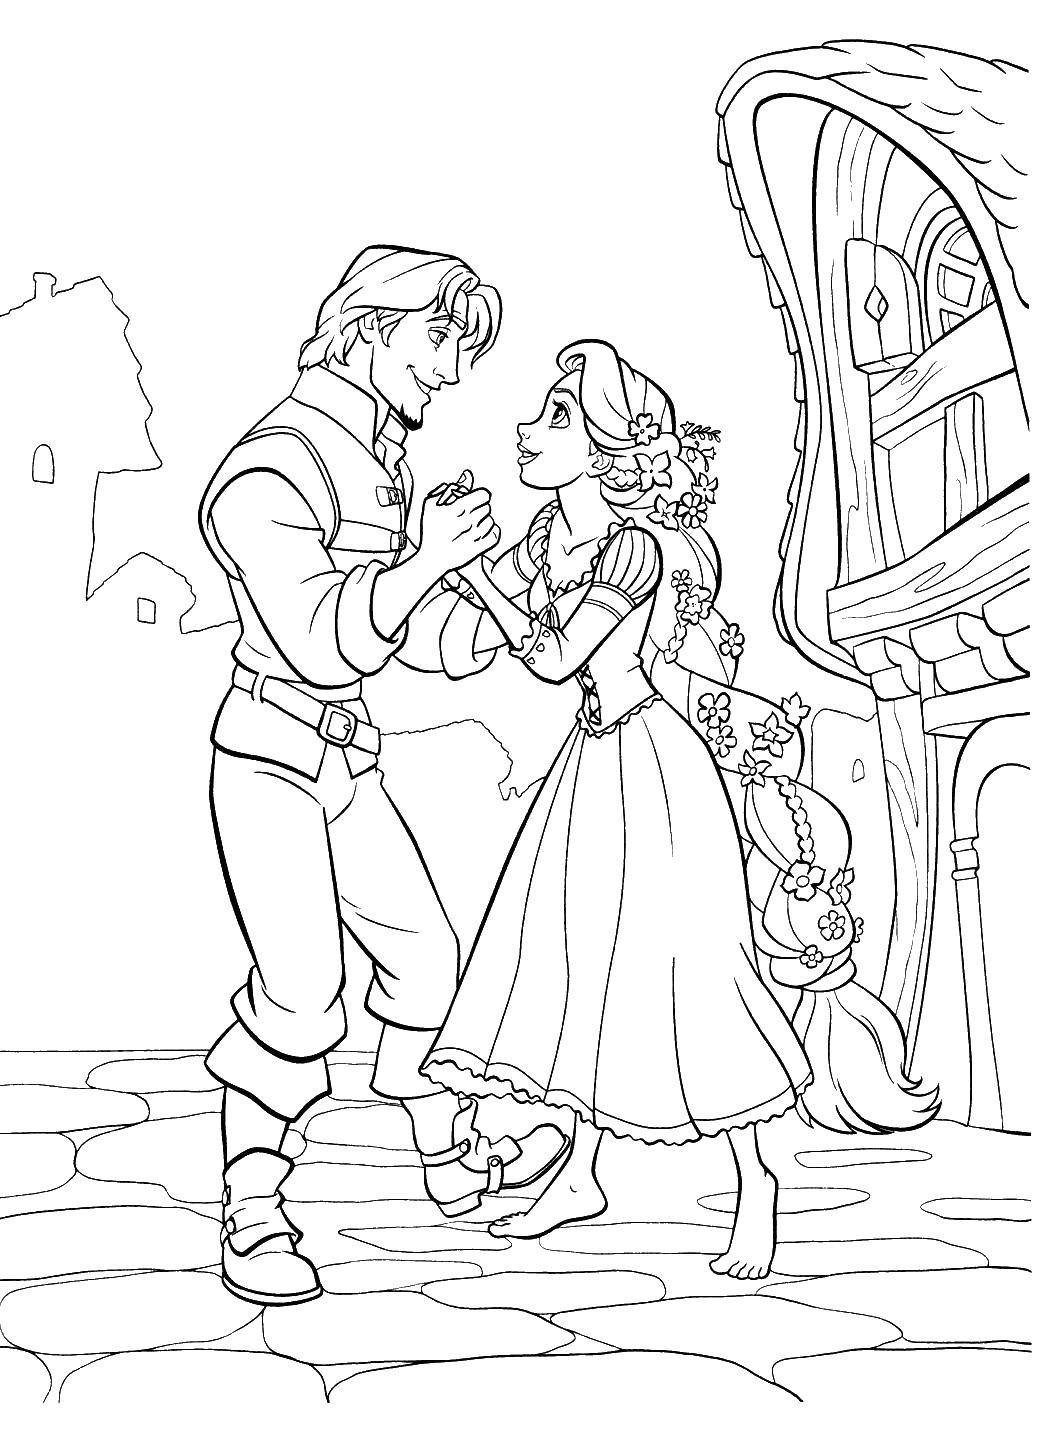 Coloring Rapunzel and Flynn. Category Cartoon character. Tags:  Rapunzel , Flynn.